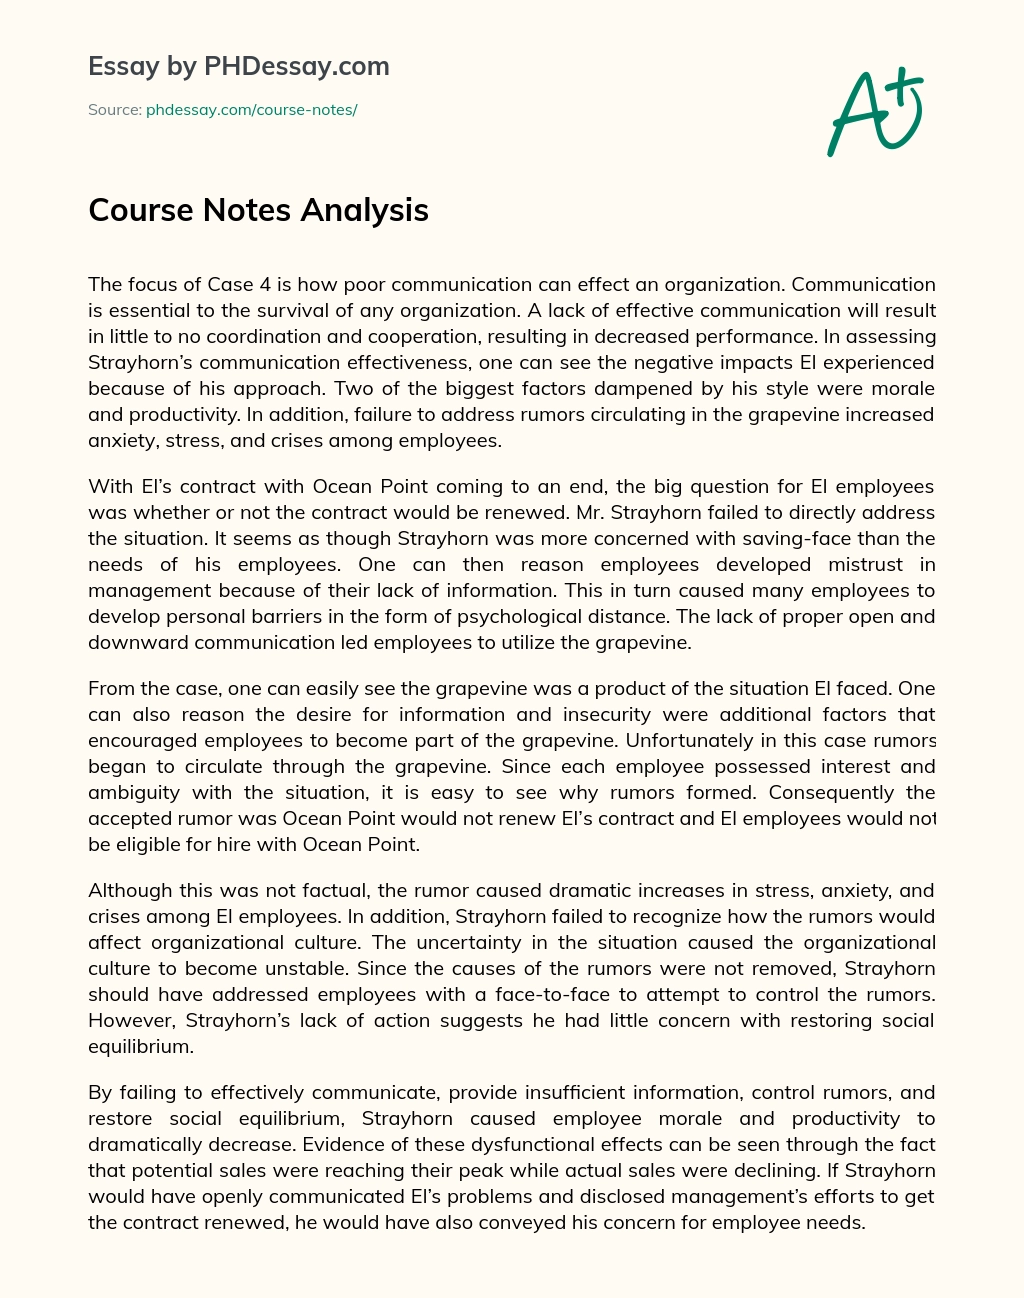 Course Notes Analysis essay